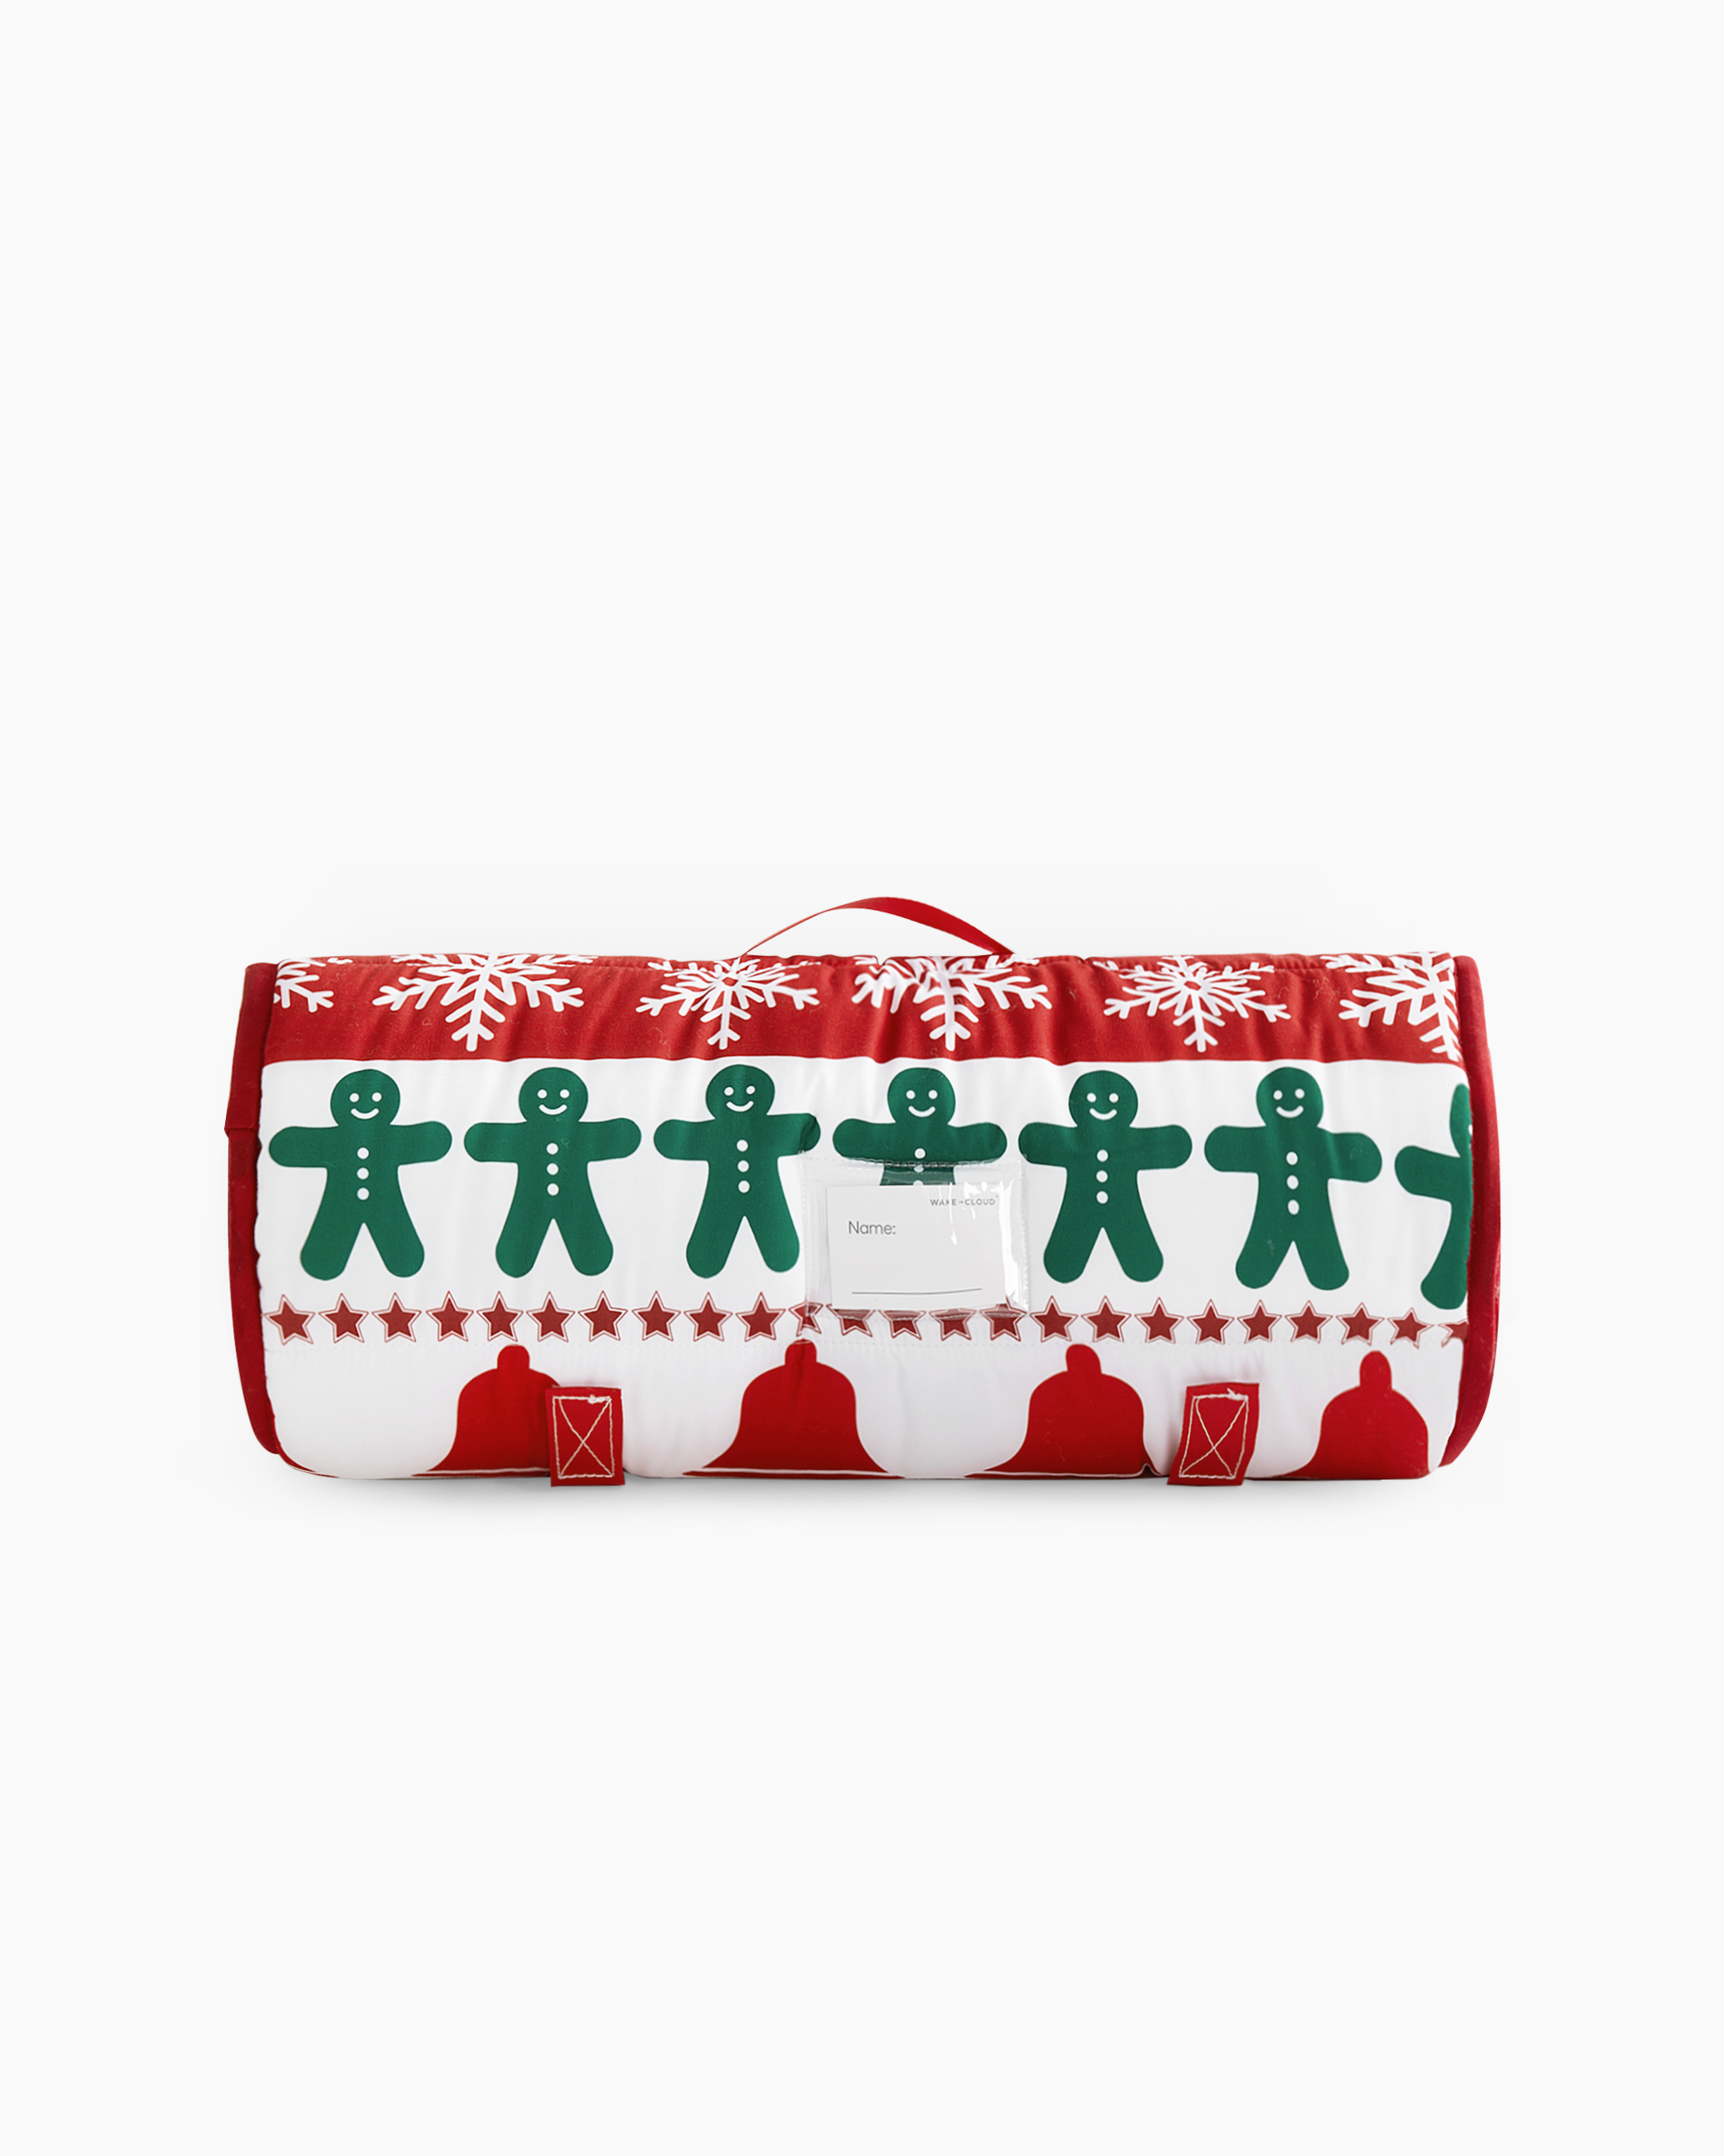 Red and Green Christmas Stocking Microfiber Kids Nap Mat